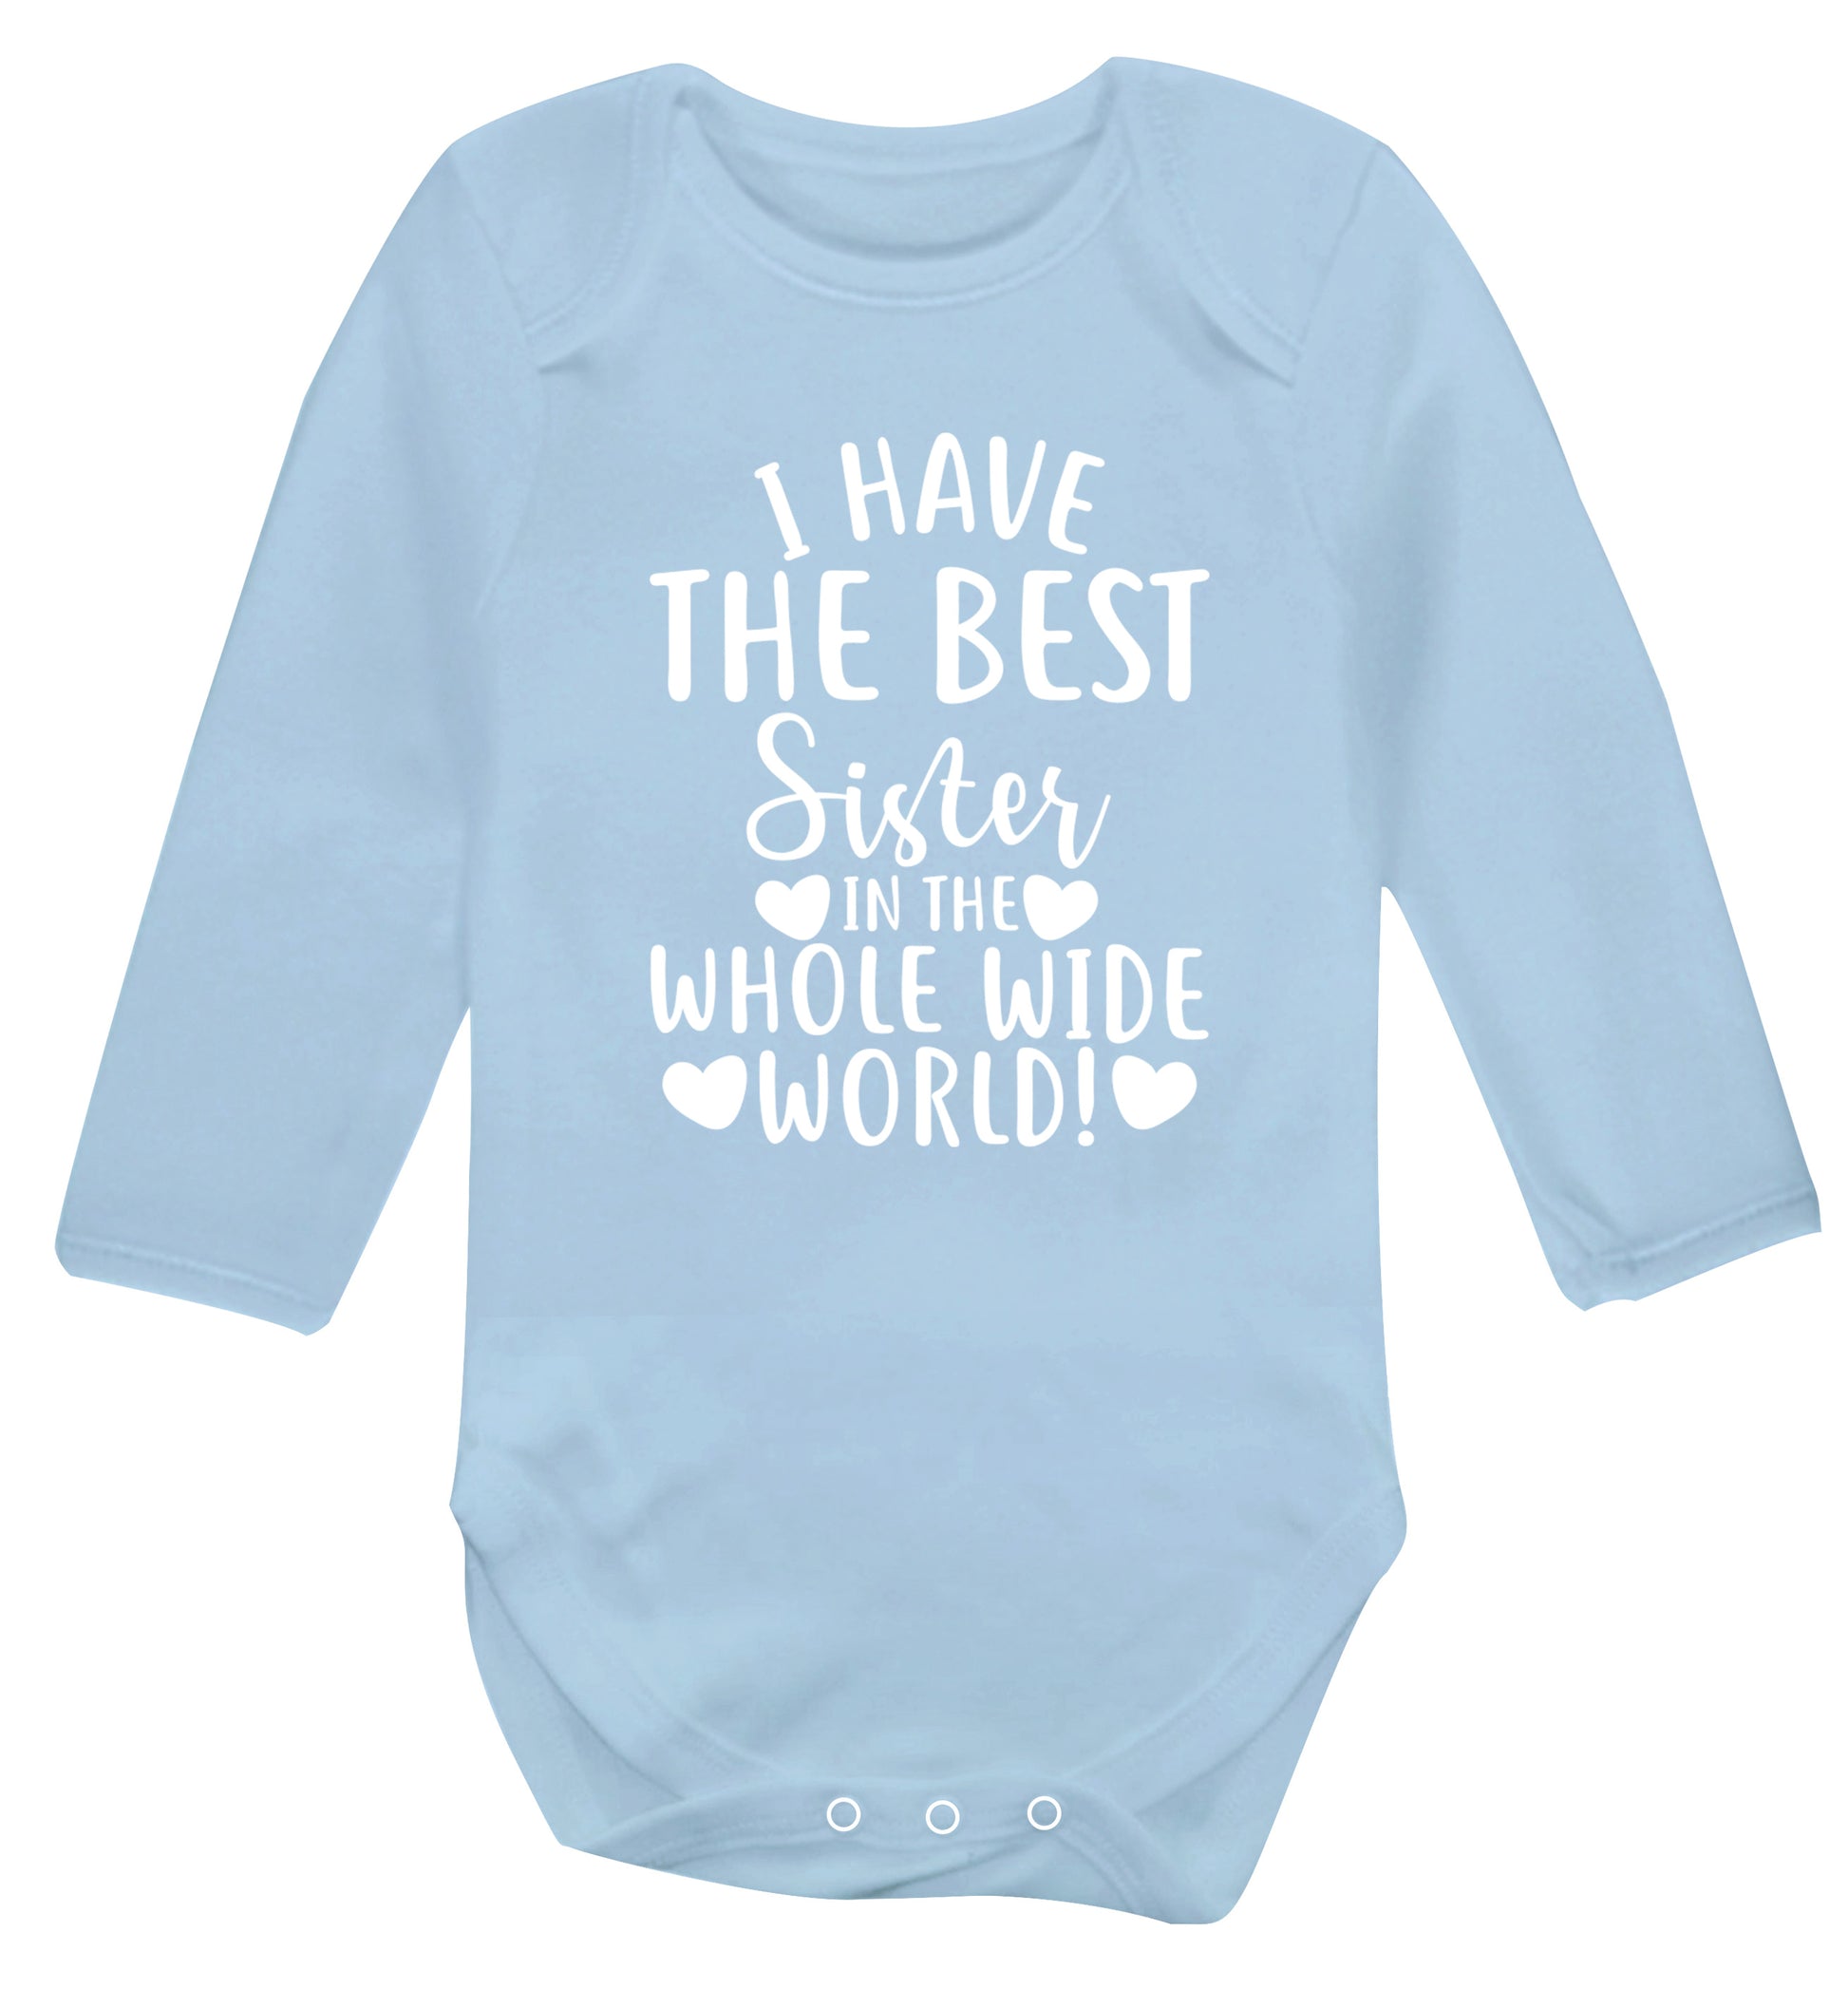 I have the best sister in the whole wide world! Baby Vest long sleeved pale blue 6-12 months